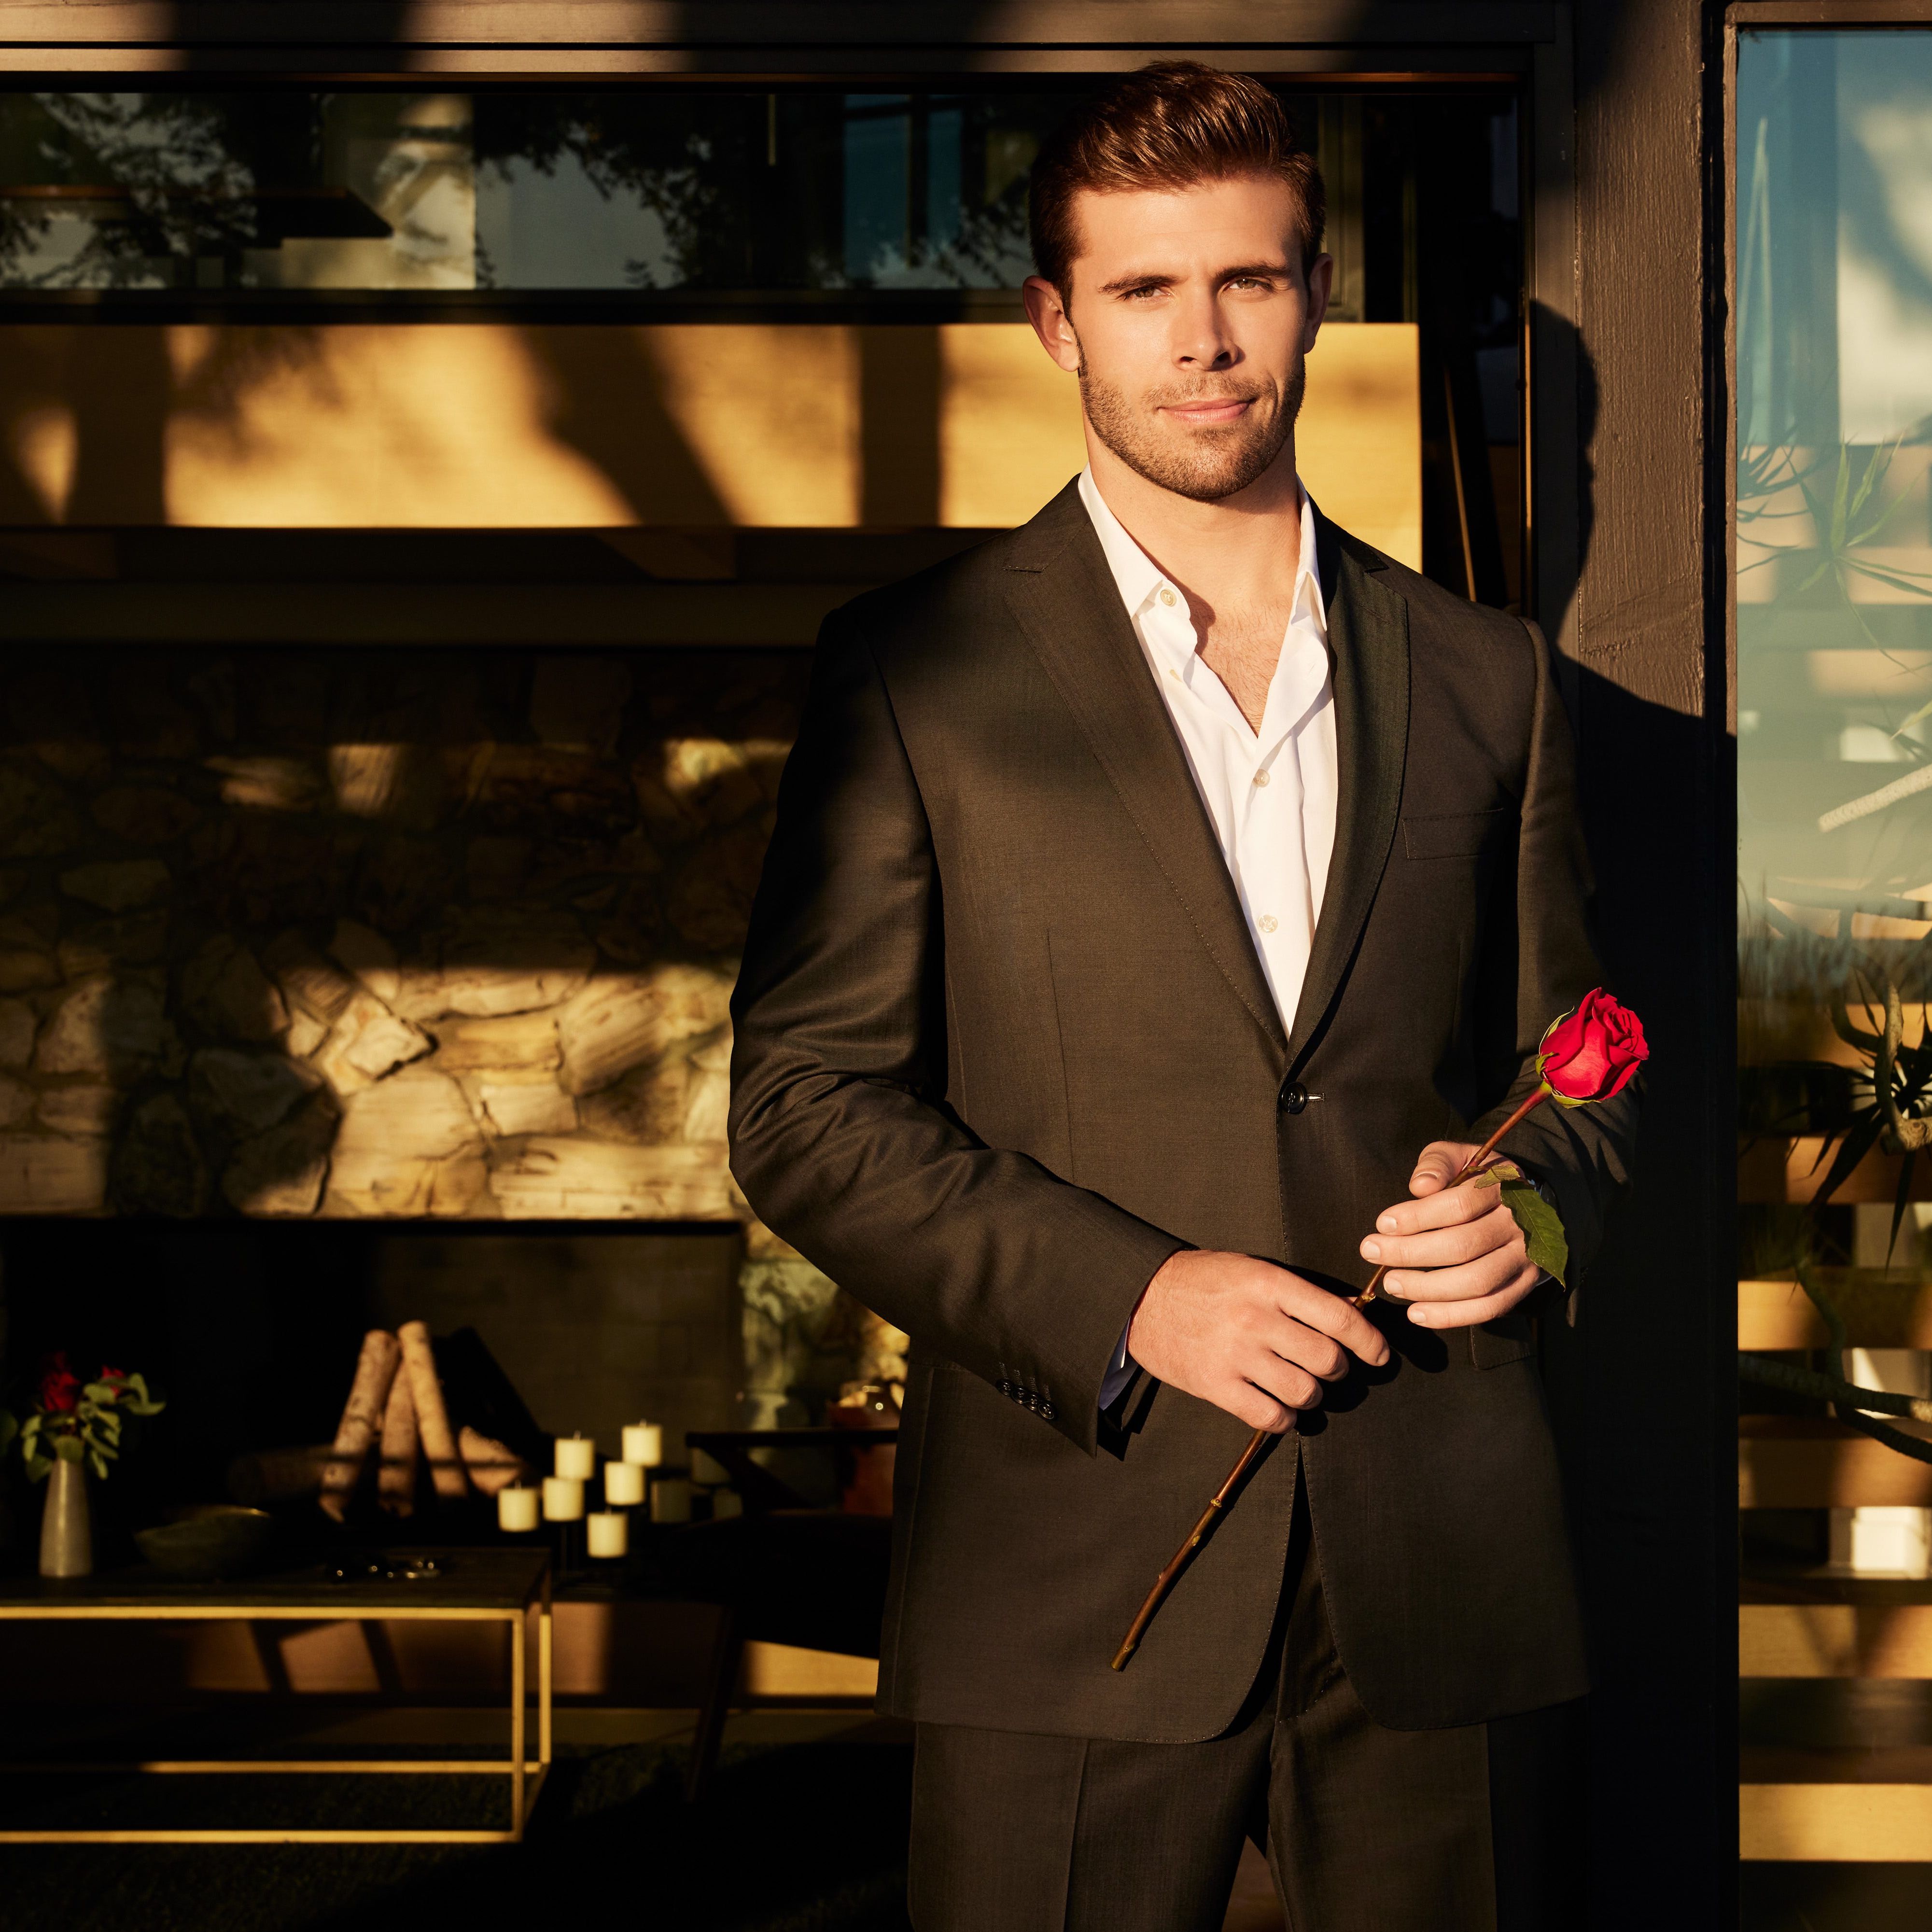 I Don’t Have It in Me to Root for Another Mediocre White Guy on ‘The Bachelor’